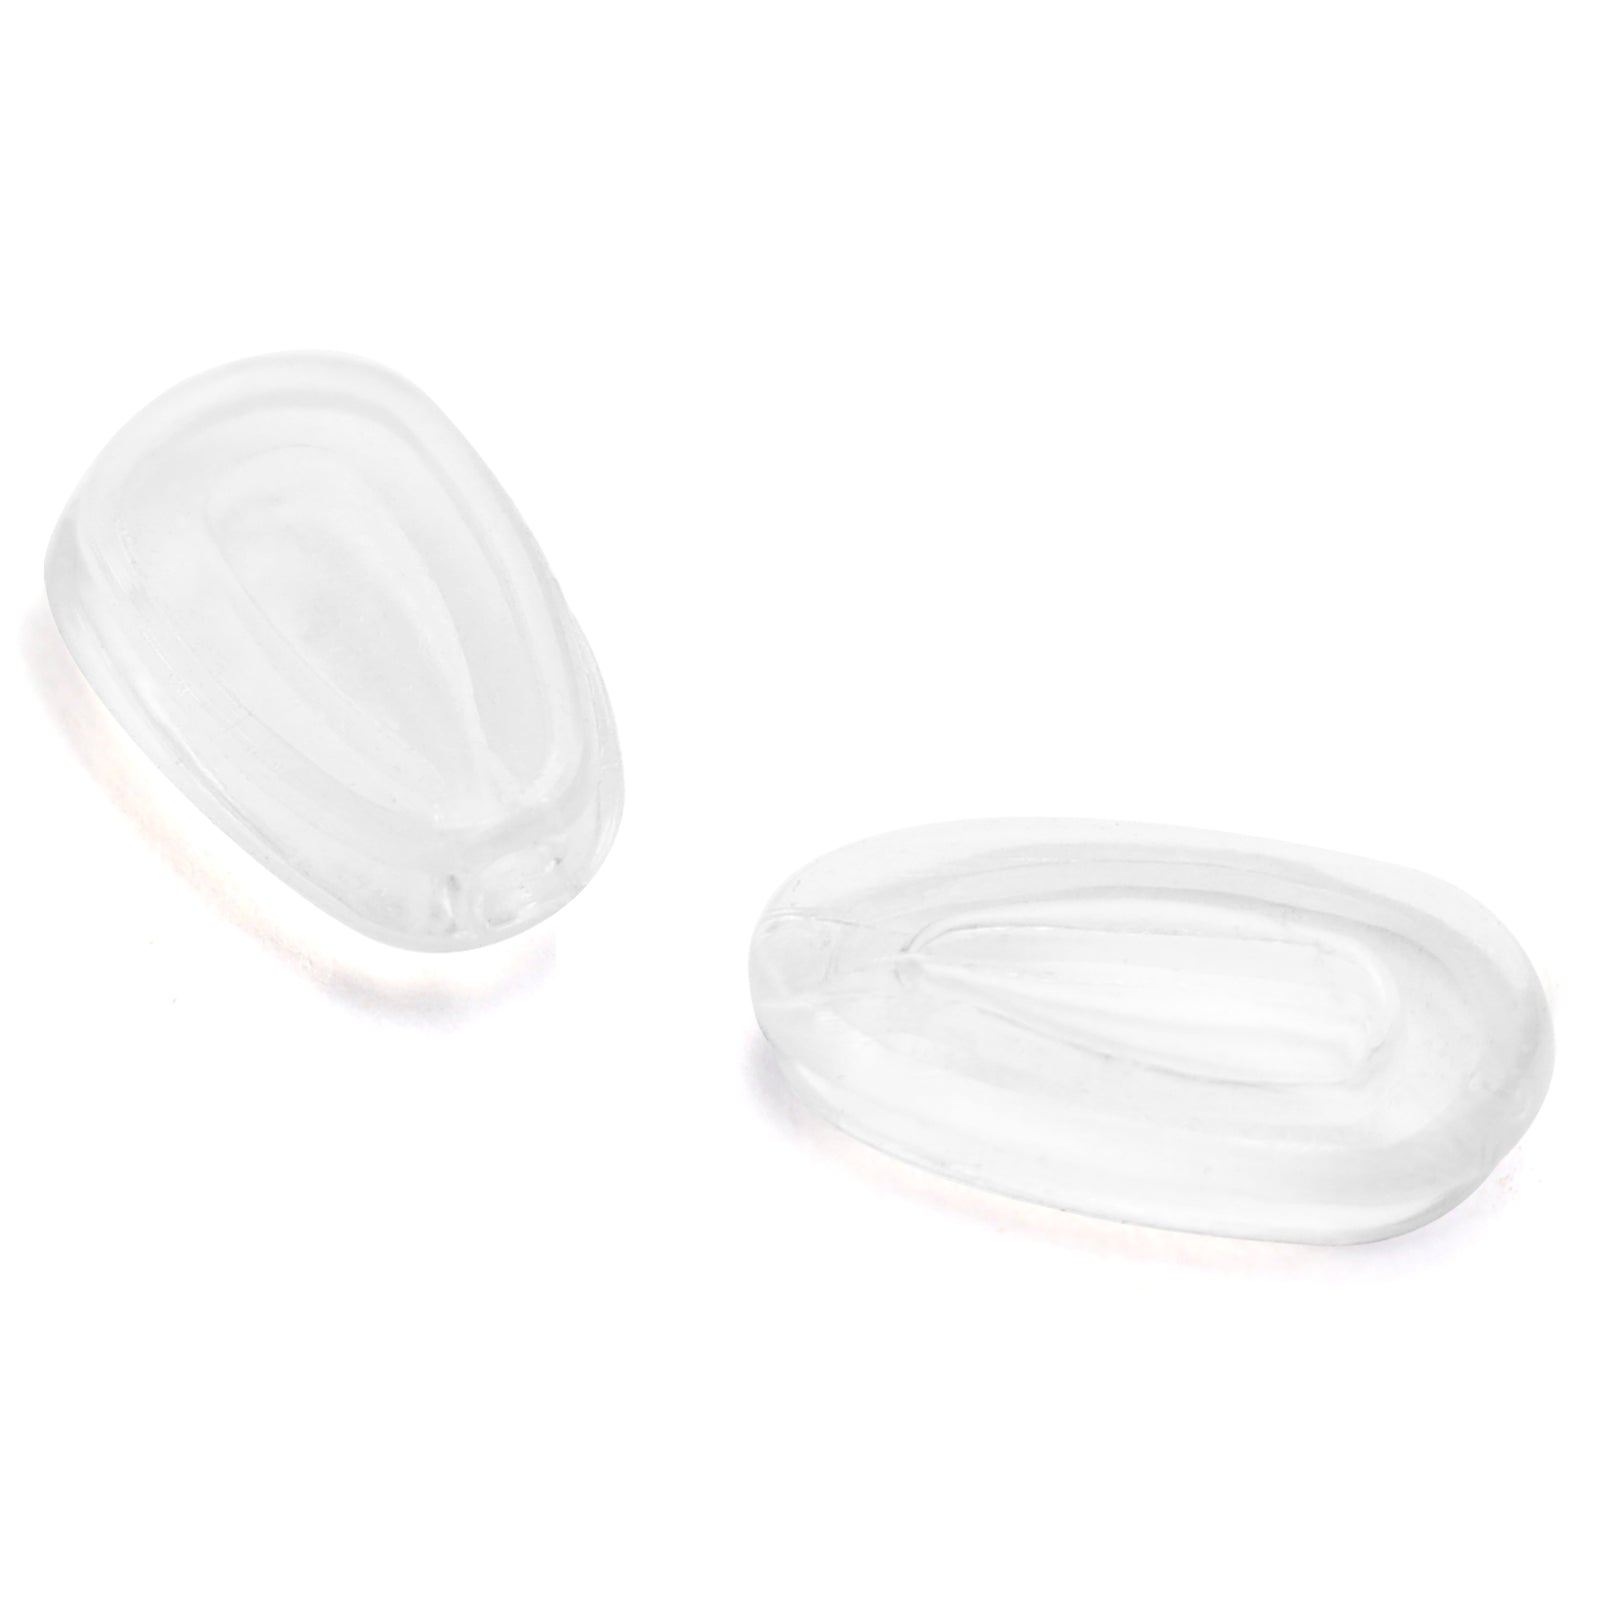 MRY™ Nose Pads Nose Pieces for Oakley Gauge 8 L Sunglasses | MryLens